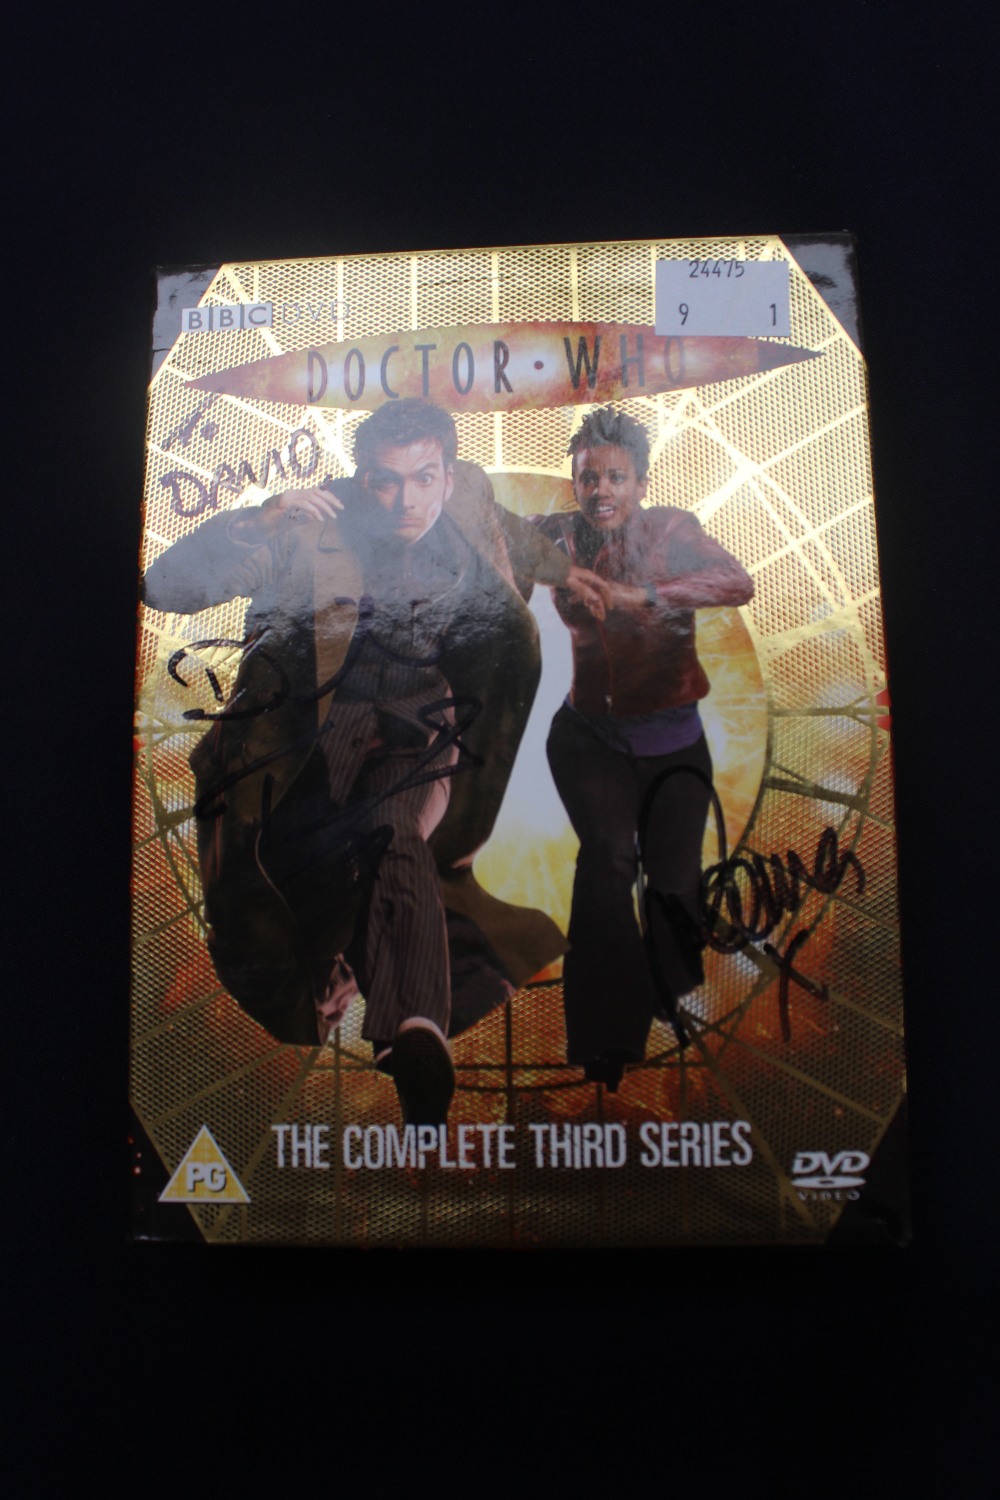 BBC Doctor Who DVD, 'The Complete Third Series', six disk set, the outer case signed by David